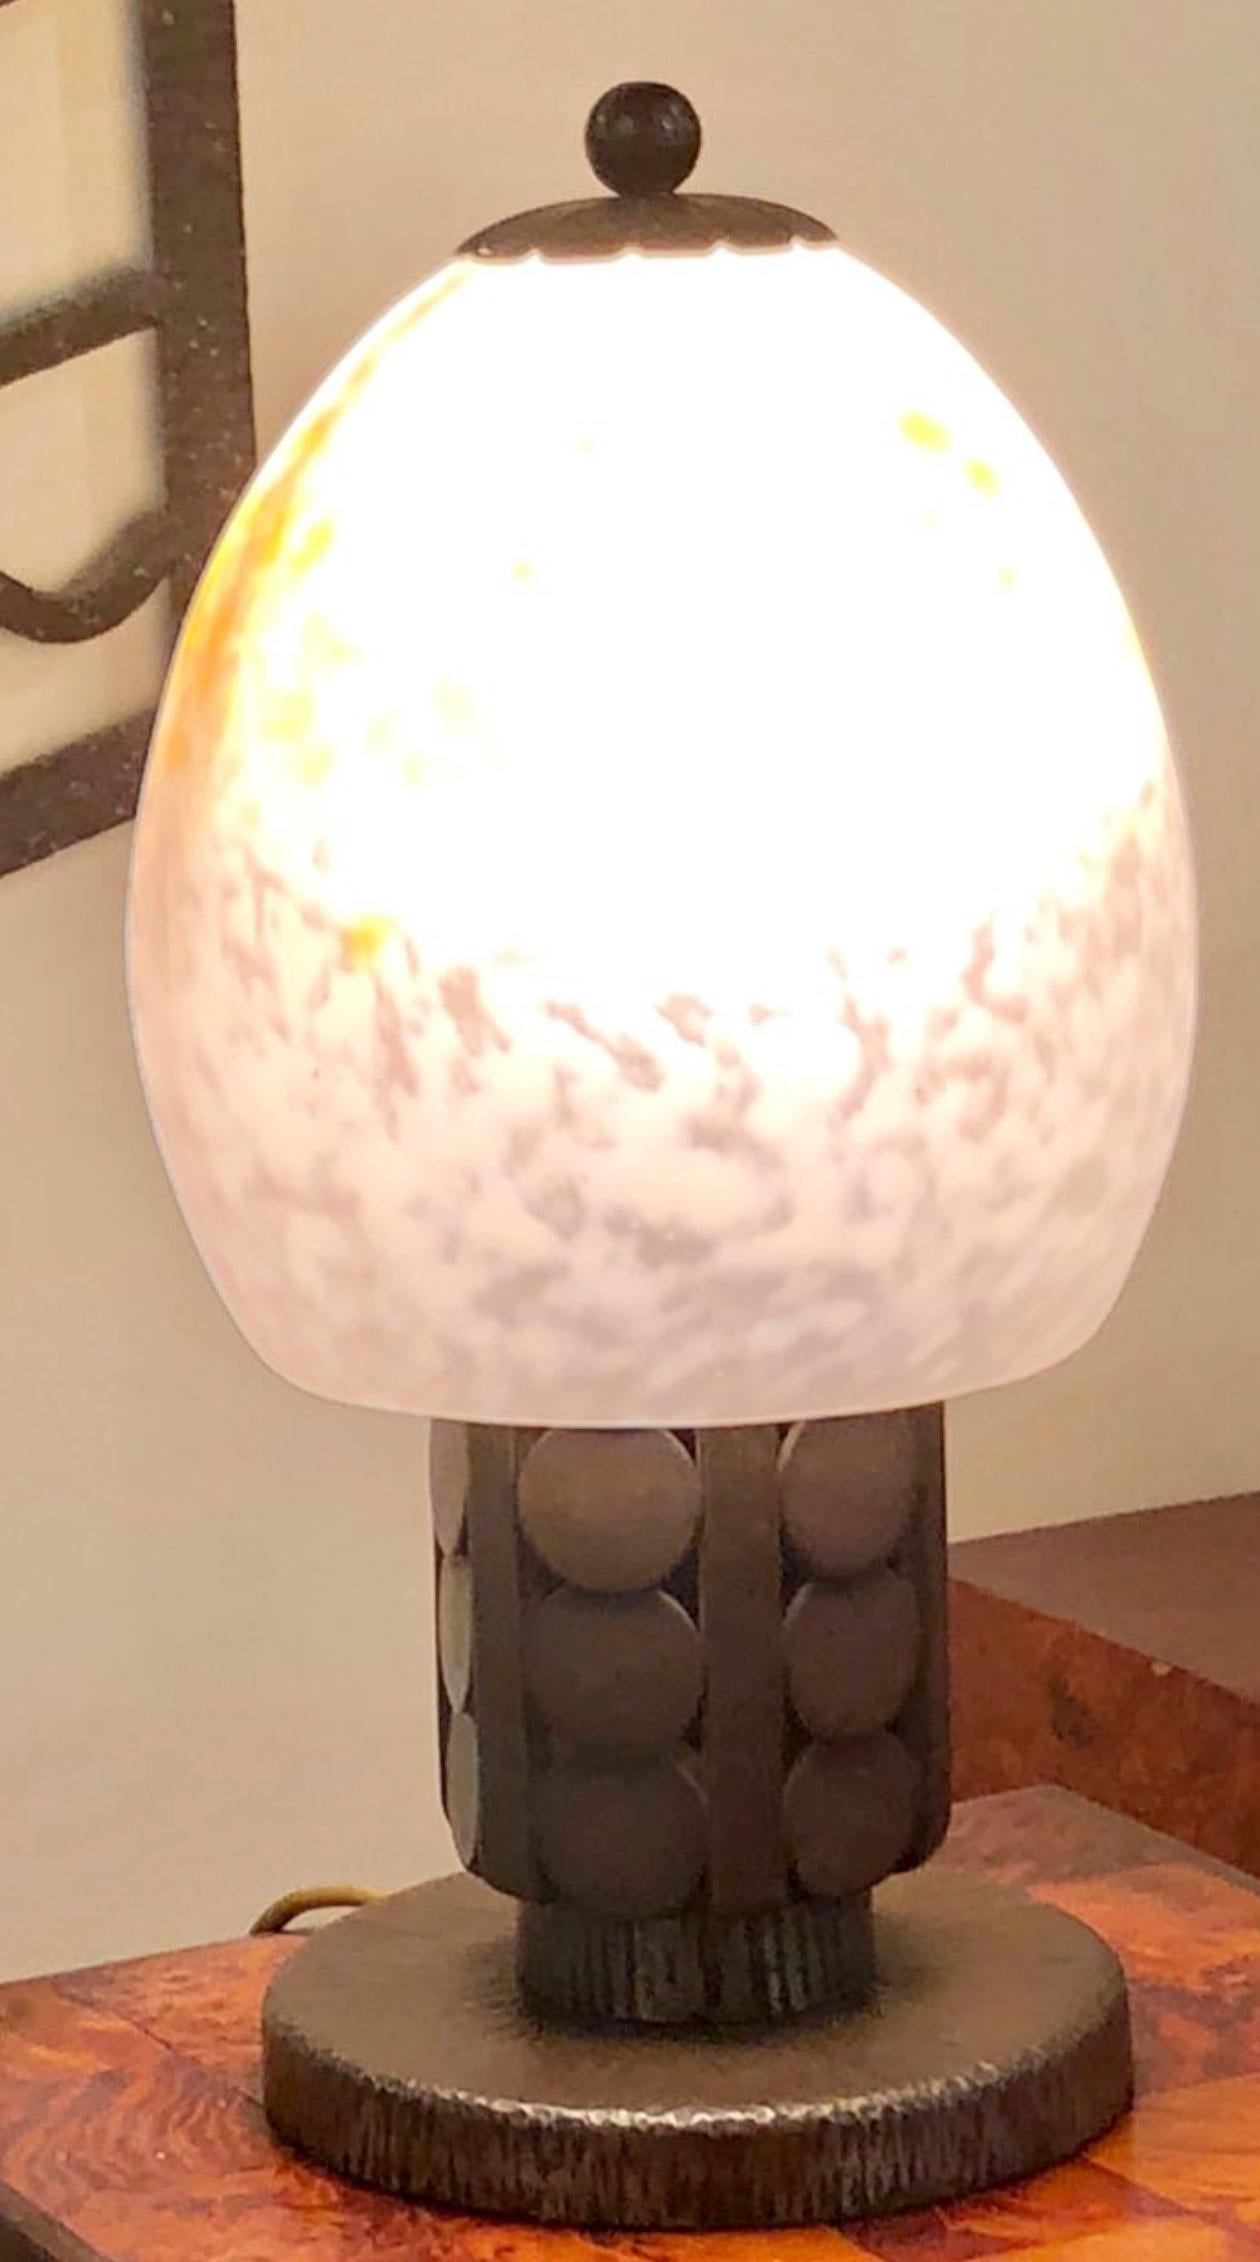 Exceptional and rare Art Deco iron table lamp. French fer forge of the highest quality. Contemporary of Edgar Brandt, Raymond Subes and Paul Kiss, this iron lamp signed on the base by designer Katona. Great looking with a mushroom style spotted